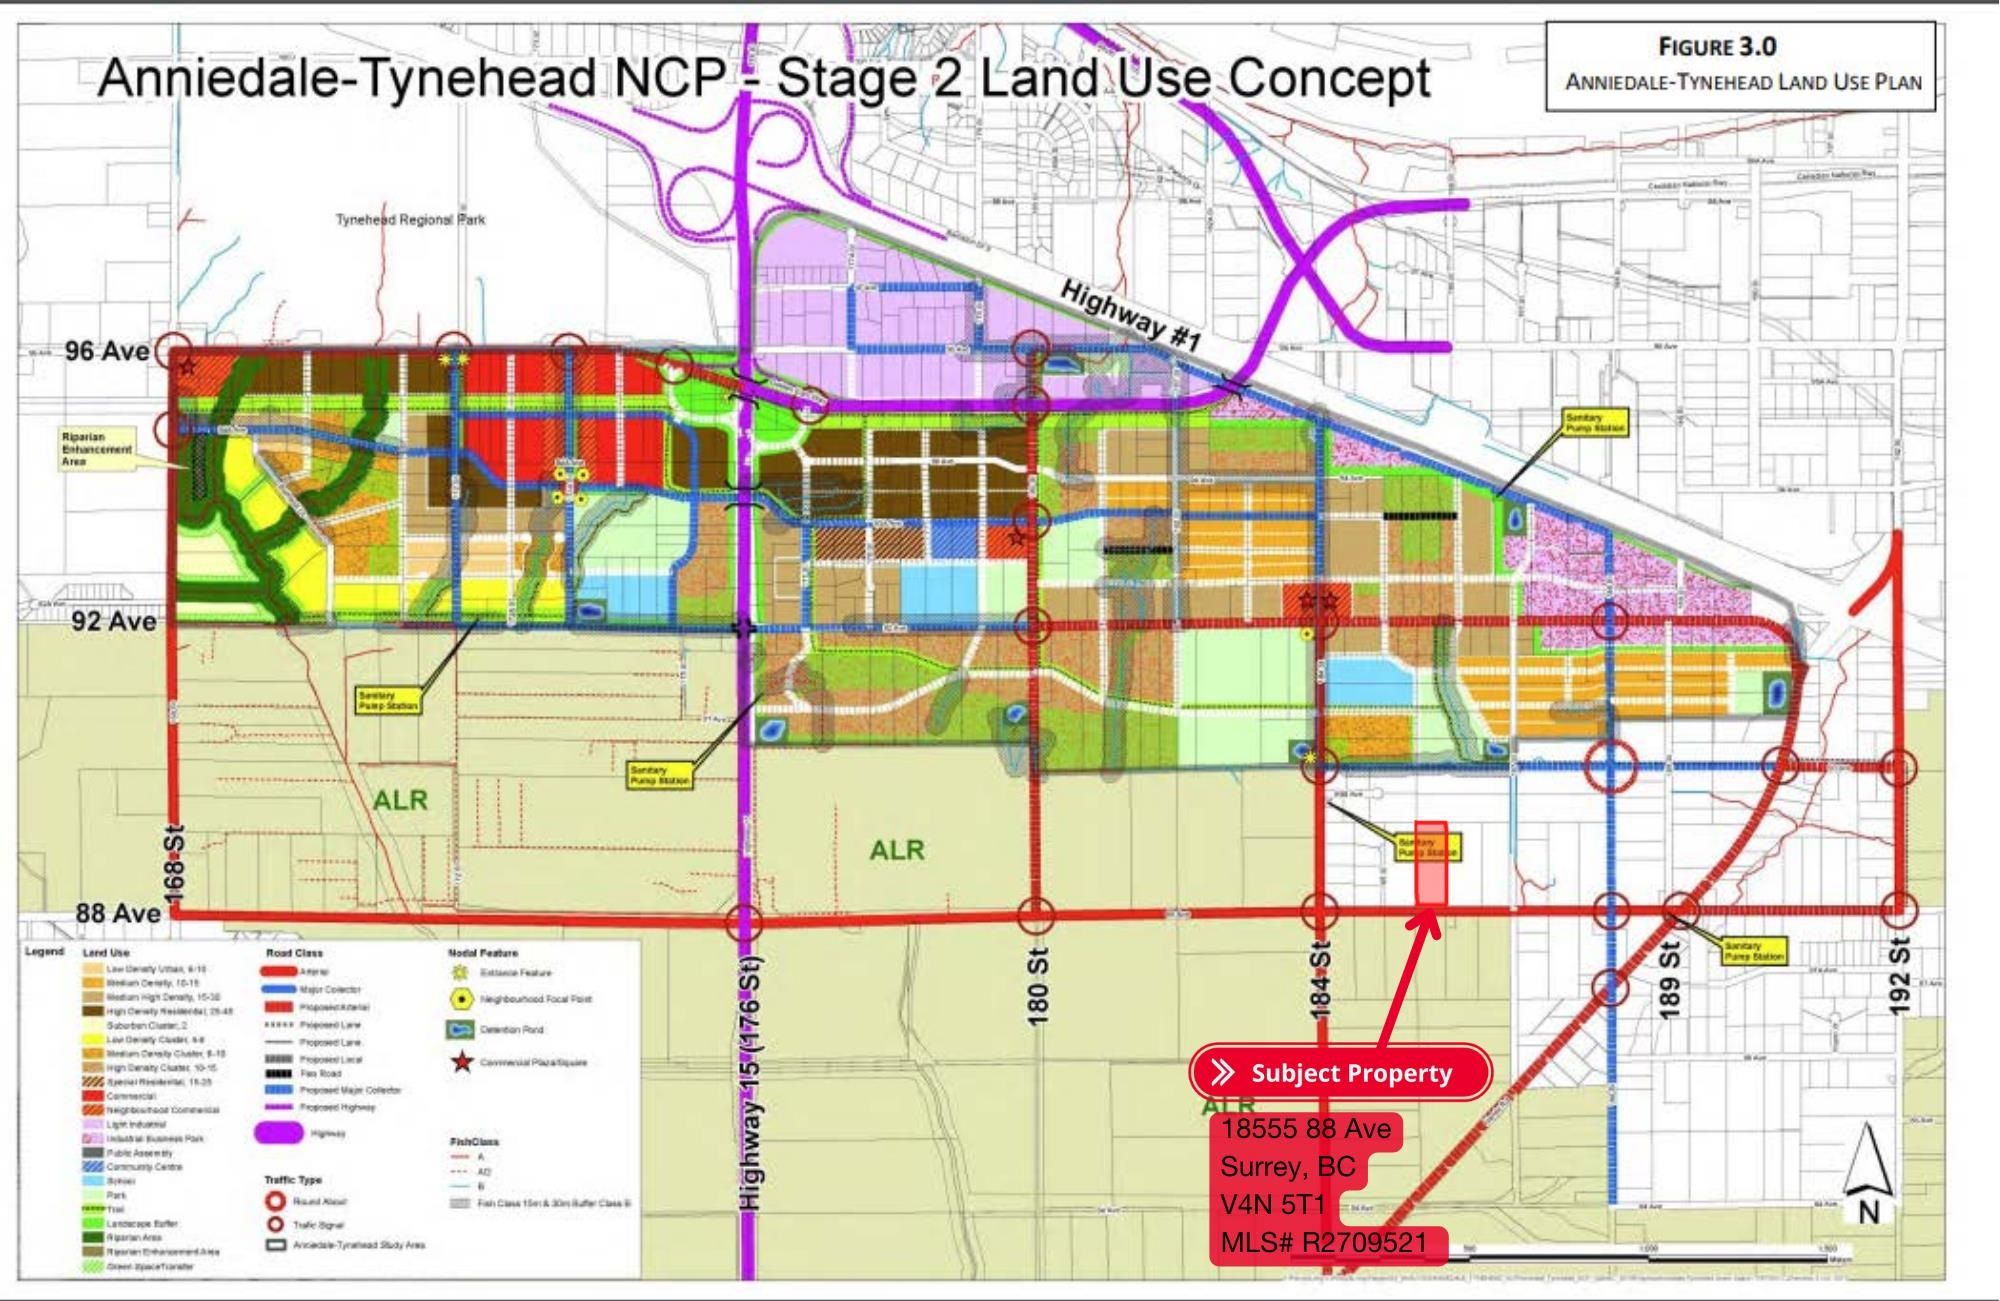 Anniedale-Tynehead NCP-Stage 2 Land Use Concept